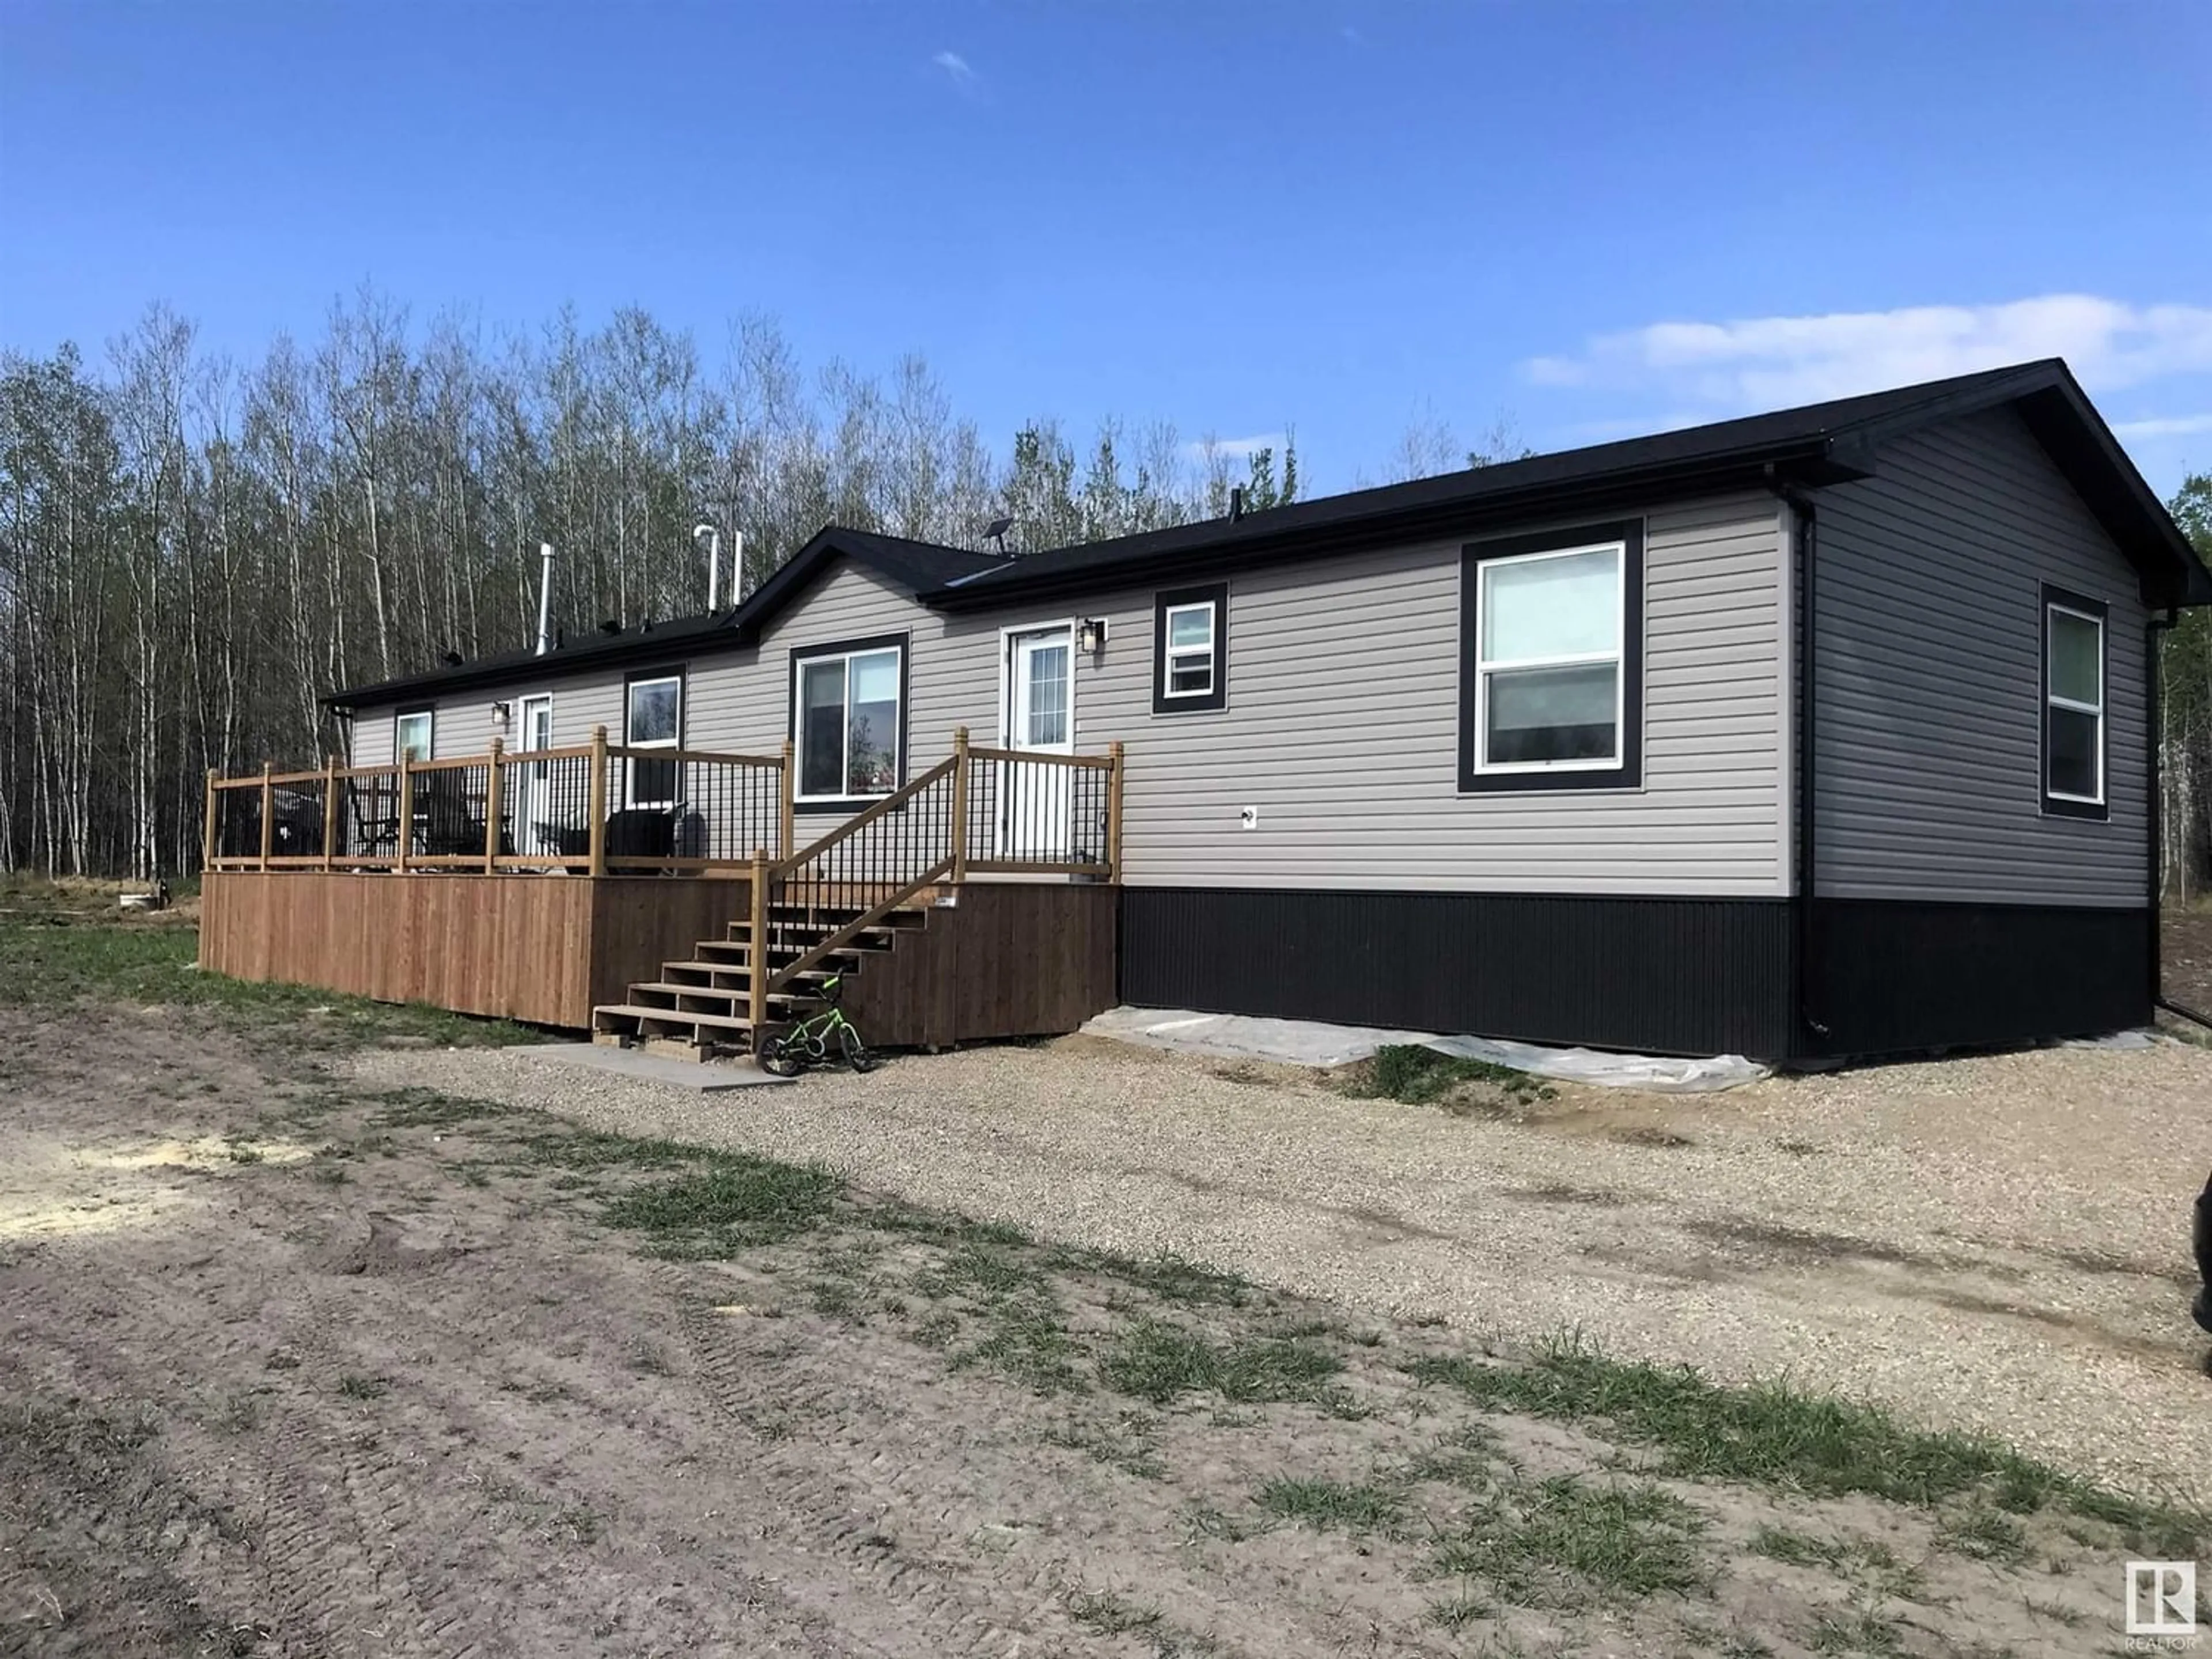 Home with vinyl exterior material for 53514 Range Road 113, Rural Yellowhead Alberta T7E5A6